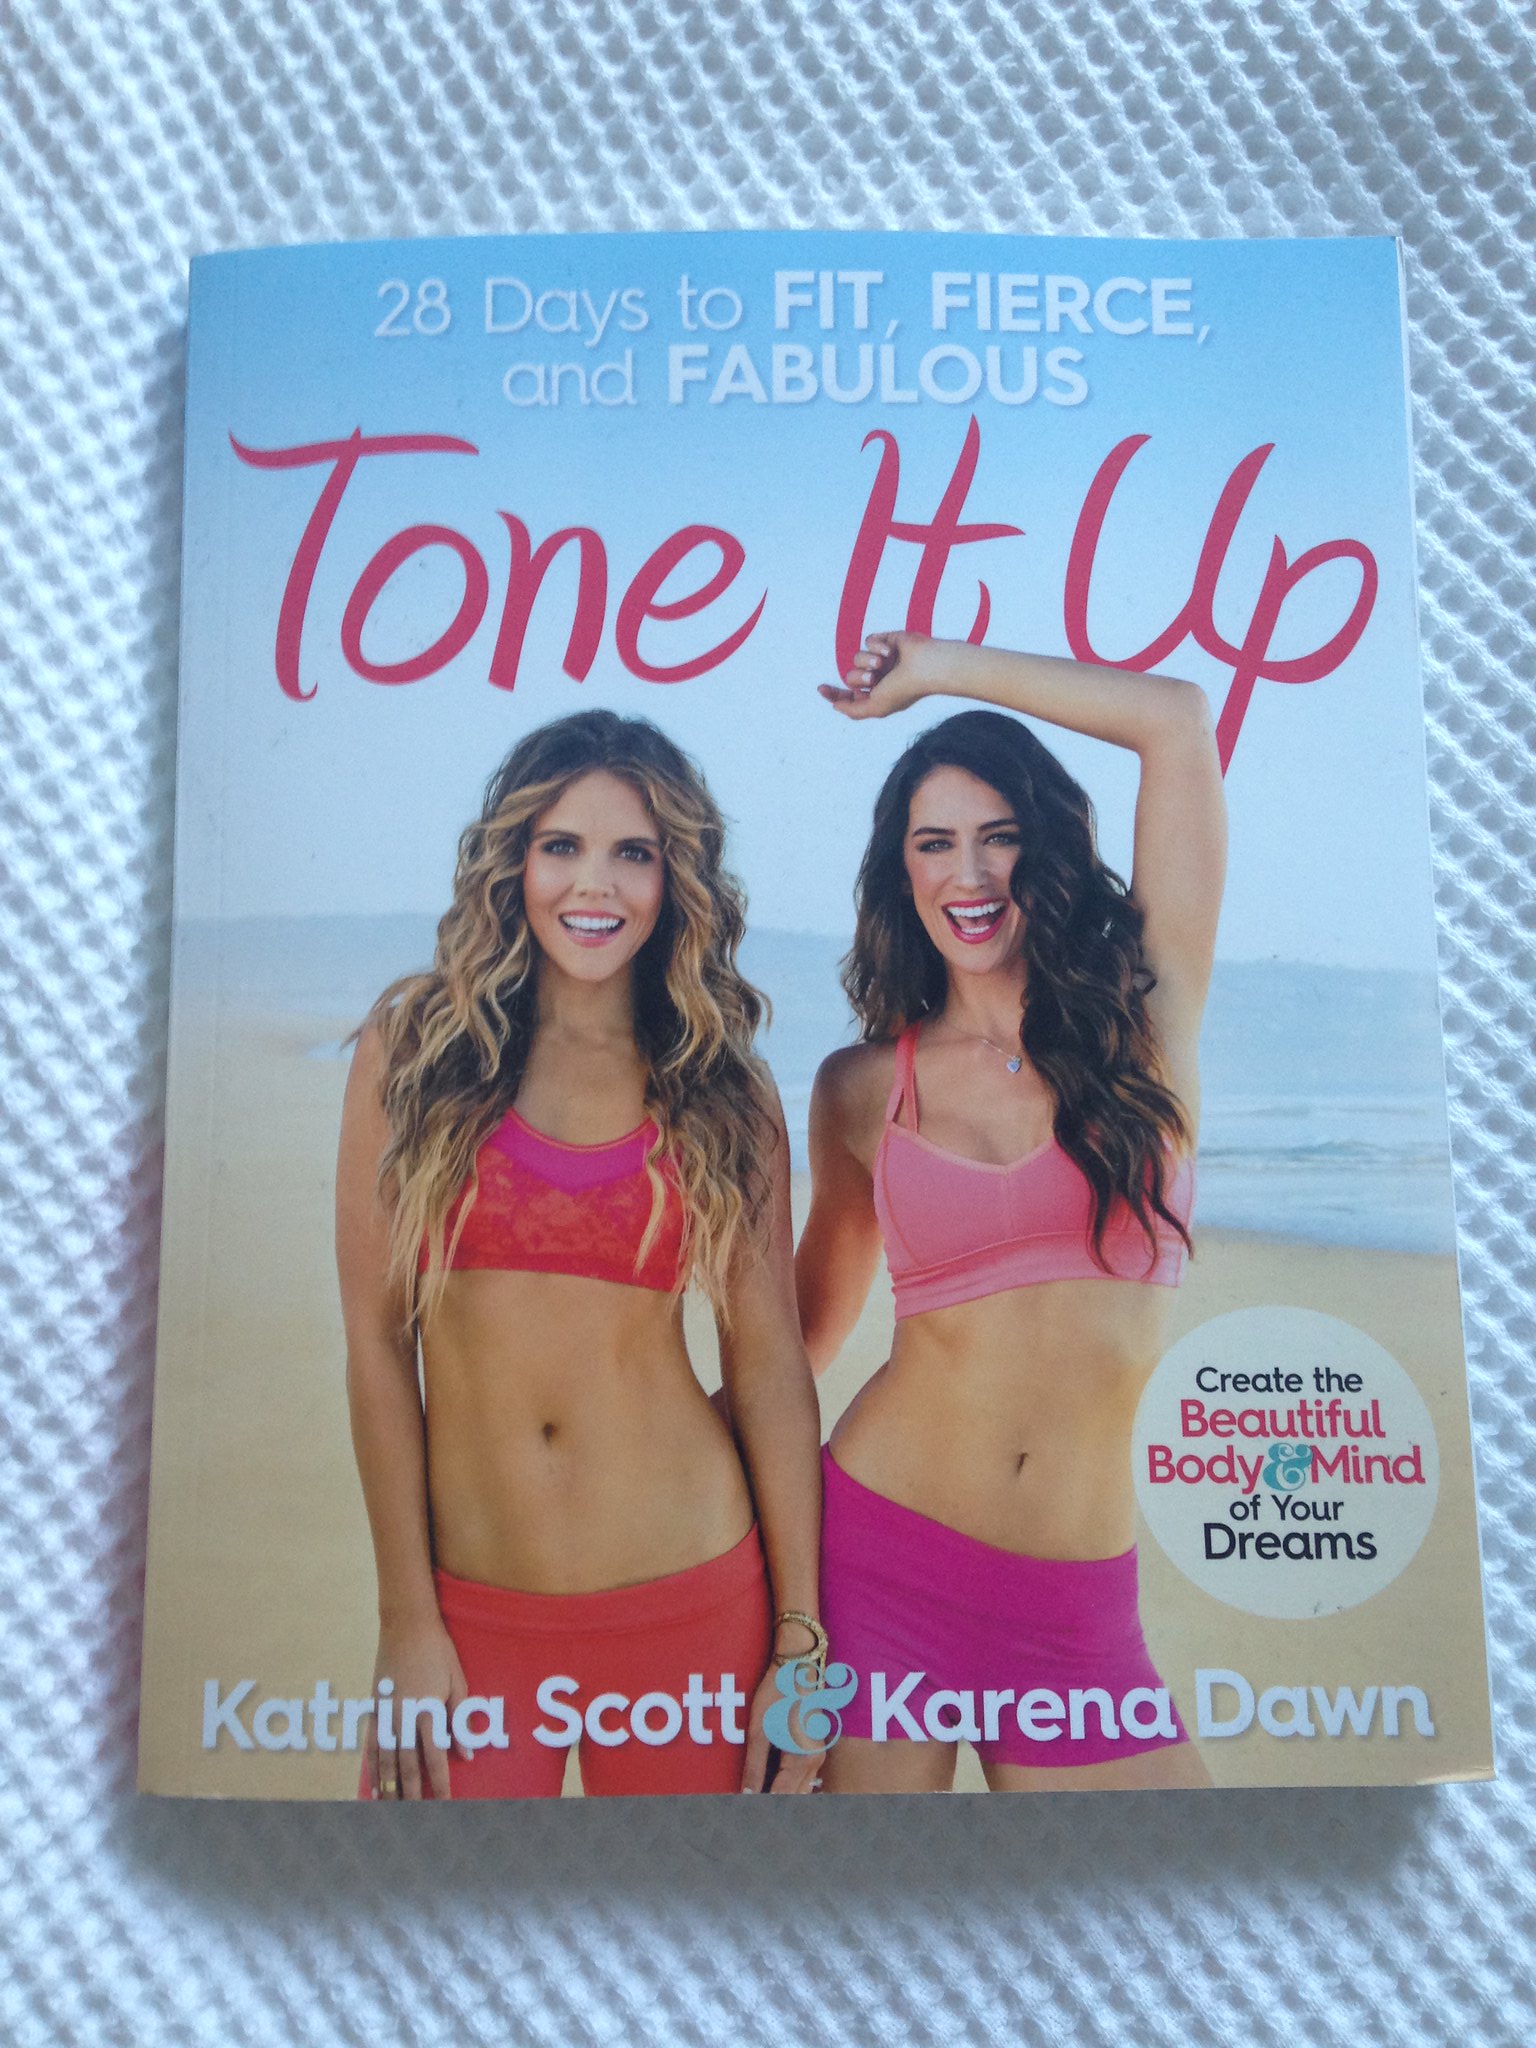 Fitness Friday: Tone It Up 28 Days to Fit, Fierce and Fabulous